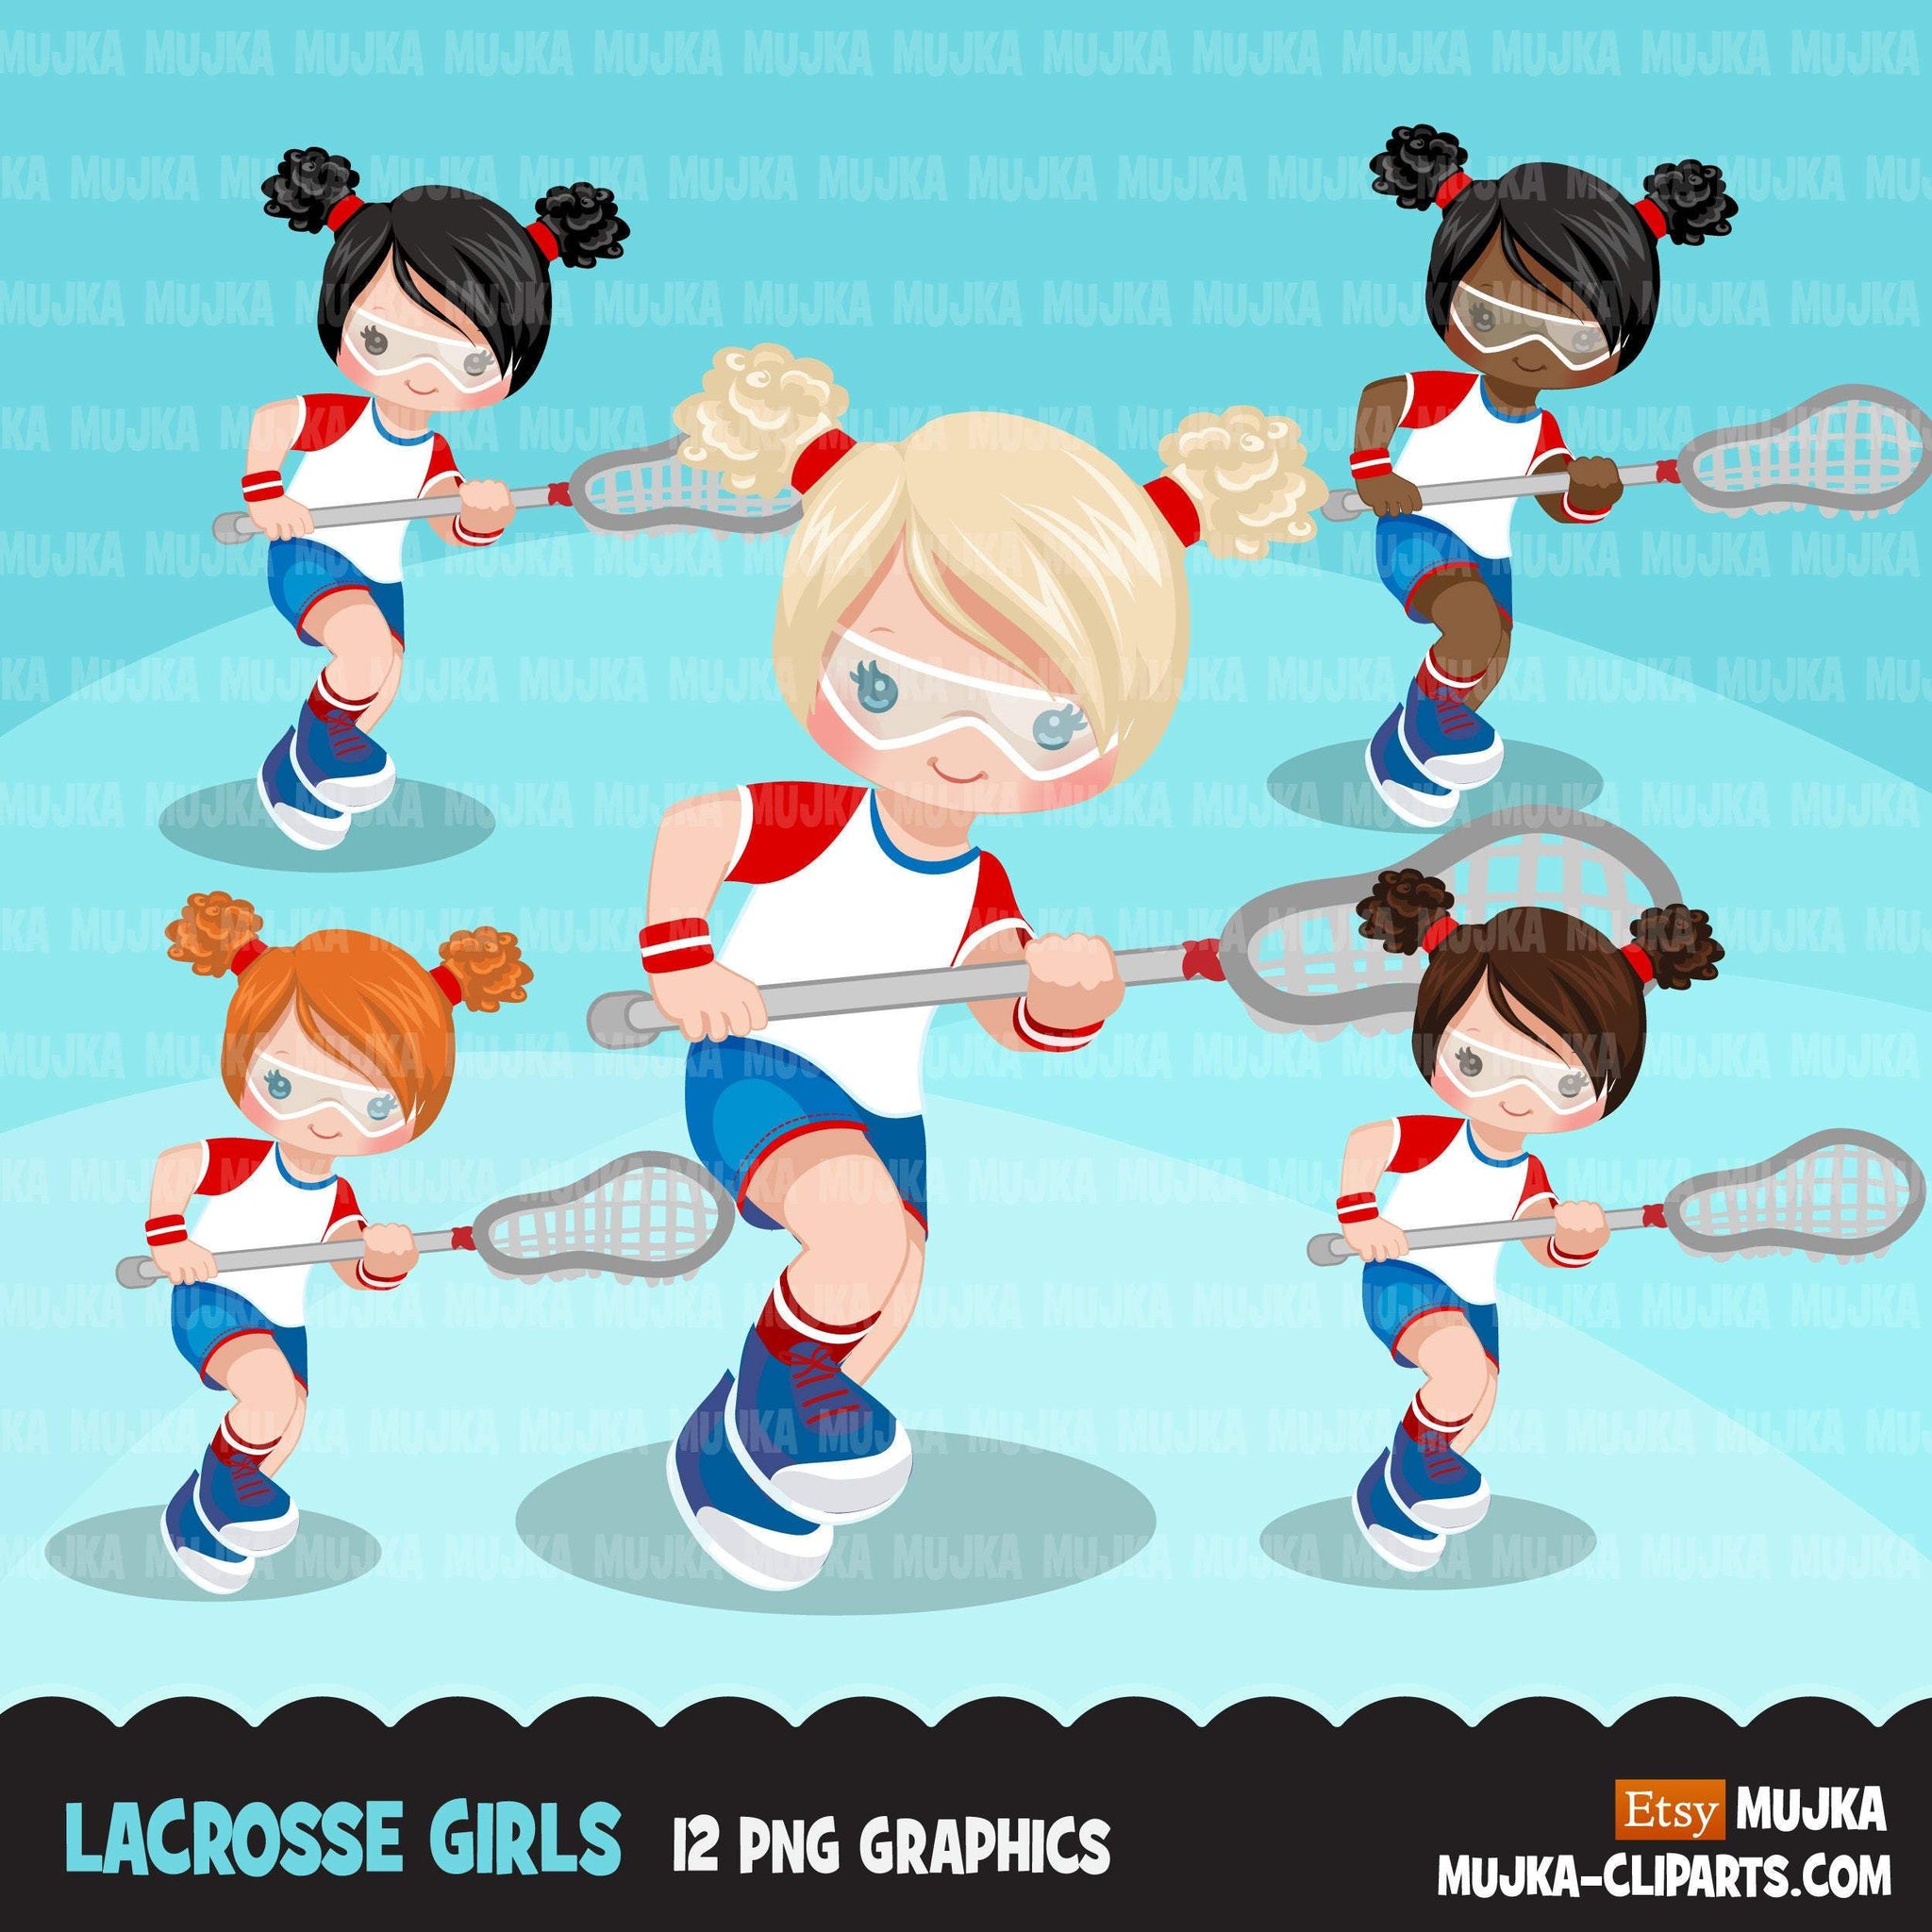 Lacrosse Clipart graphics, girls lacrosse player characters, stickers, commercial use, school activity clip art